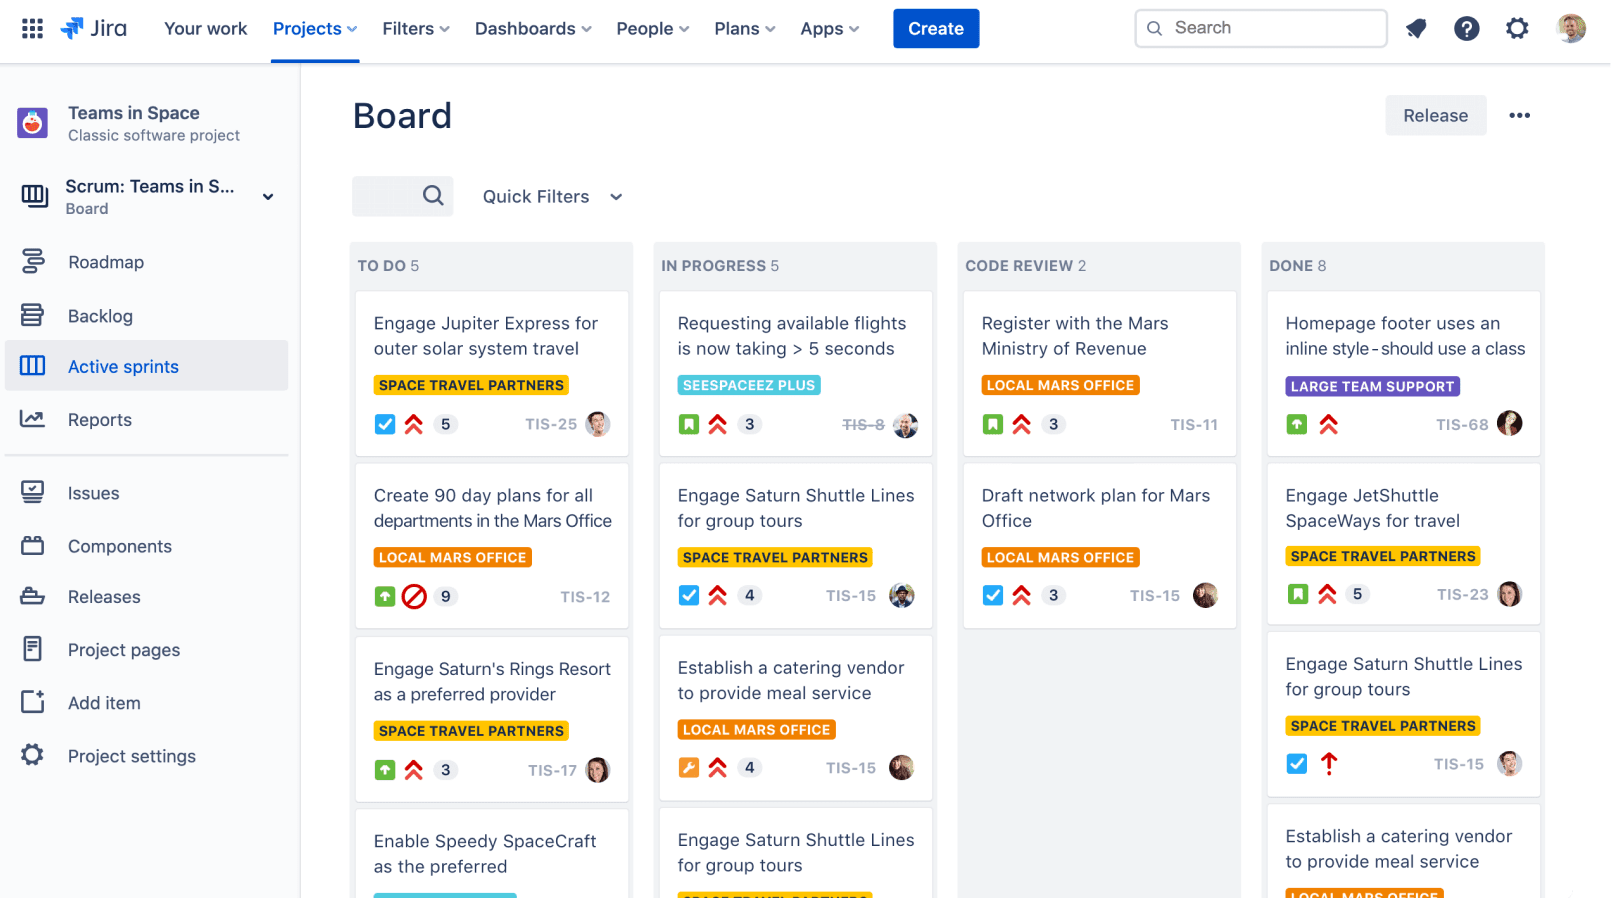 Jira is one of the most common IT project management tools